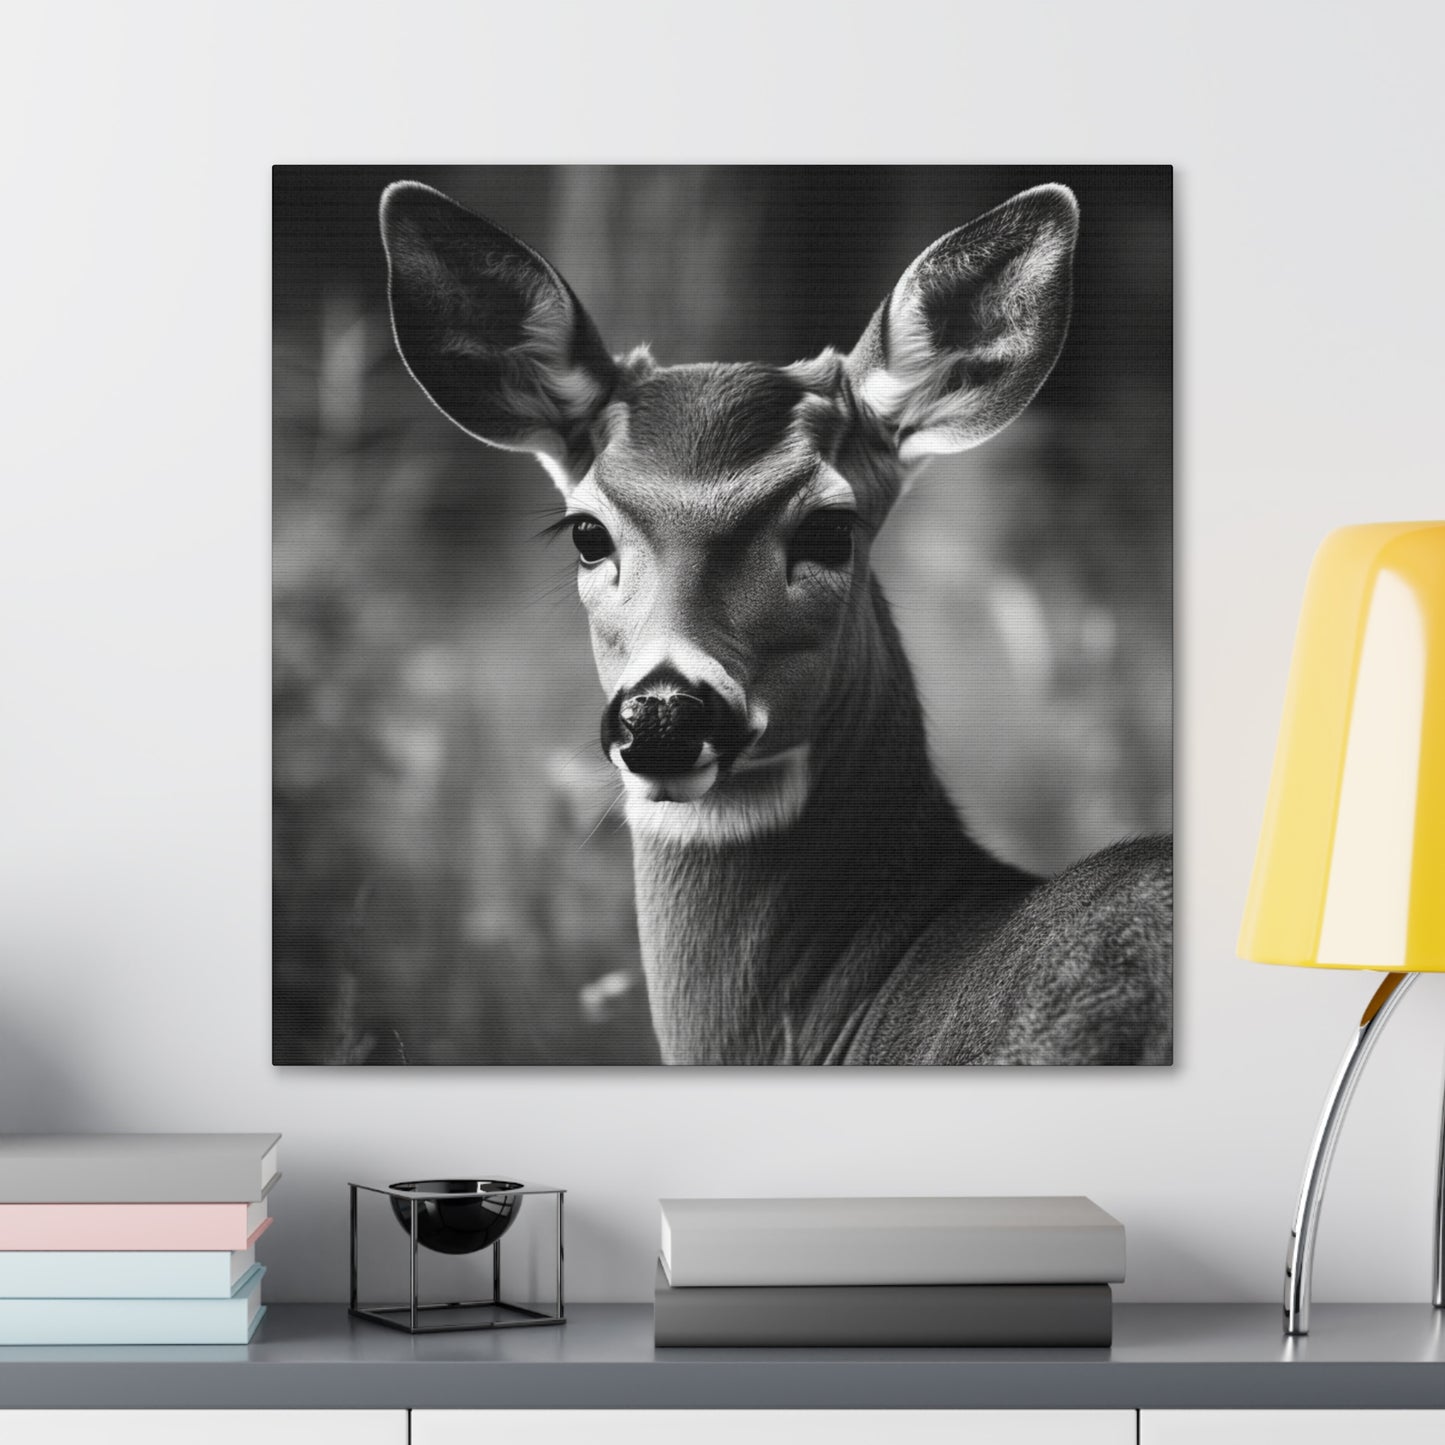 "Black & White Doe" Hunting Wall Art - Weave Got Gifts - Unique Gifts You Won’t Find Anywhere Else!